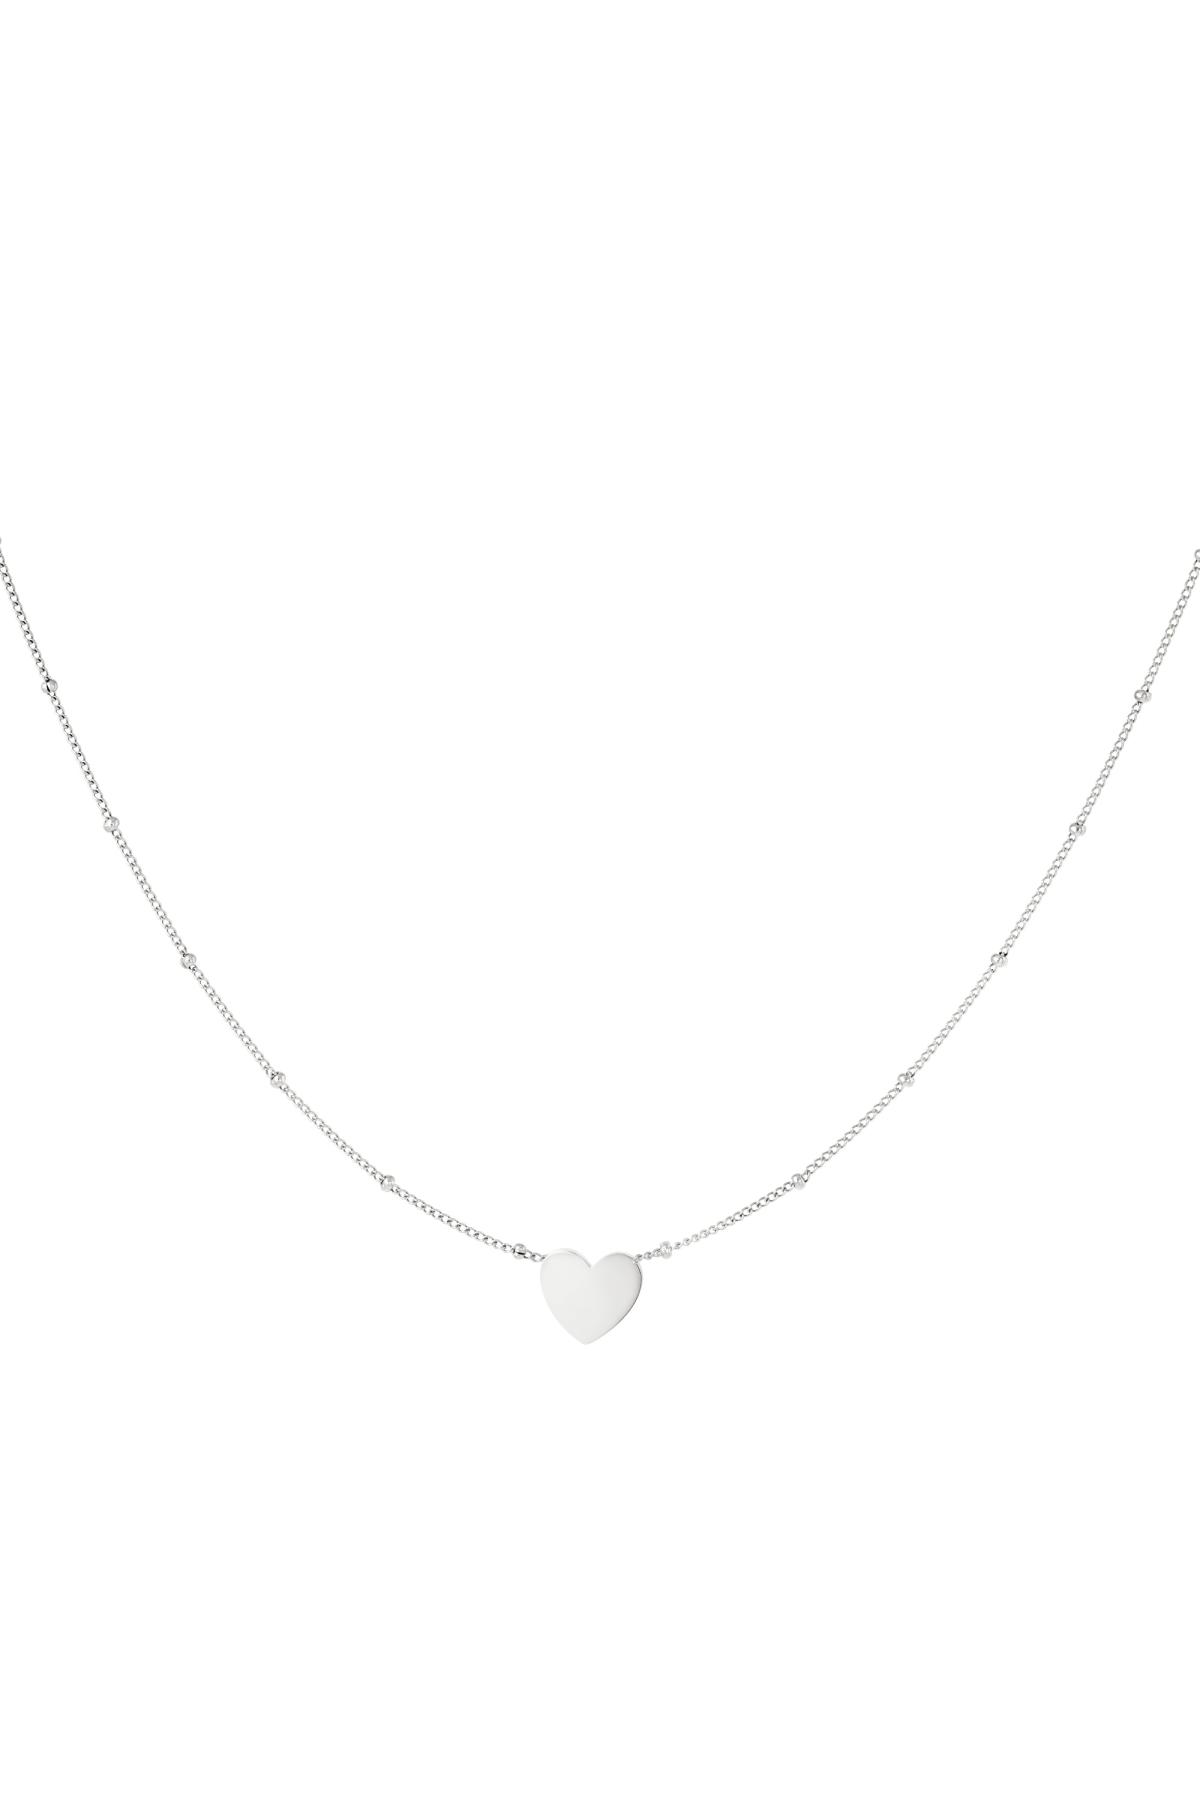 Minimalistic necklace heart Silver Stainless Steel